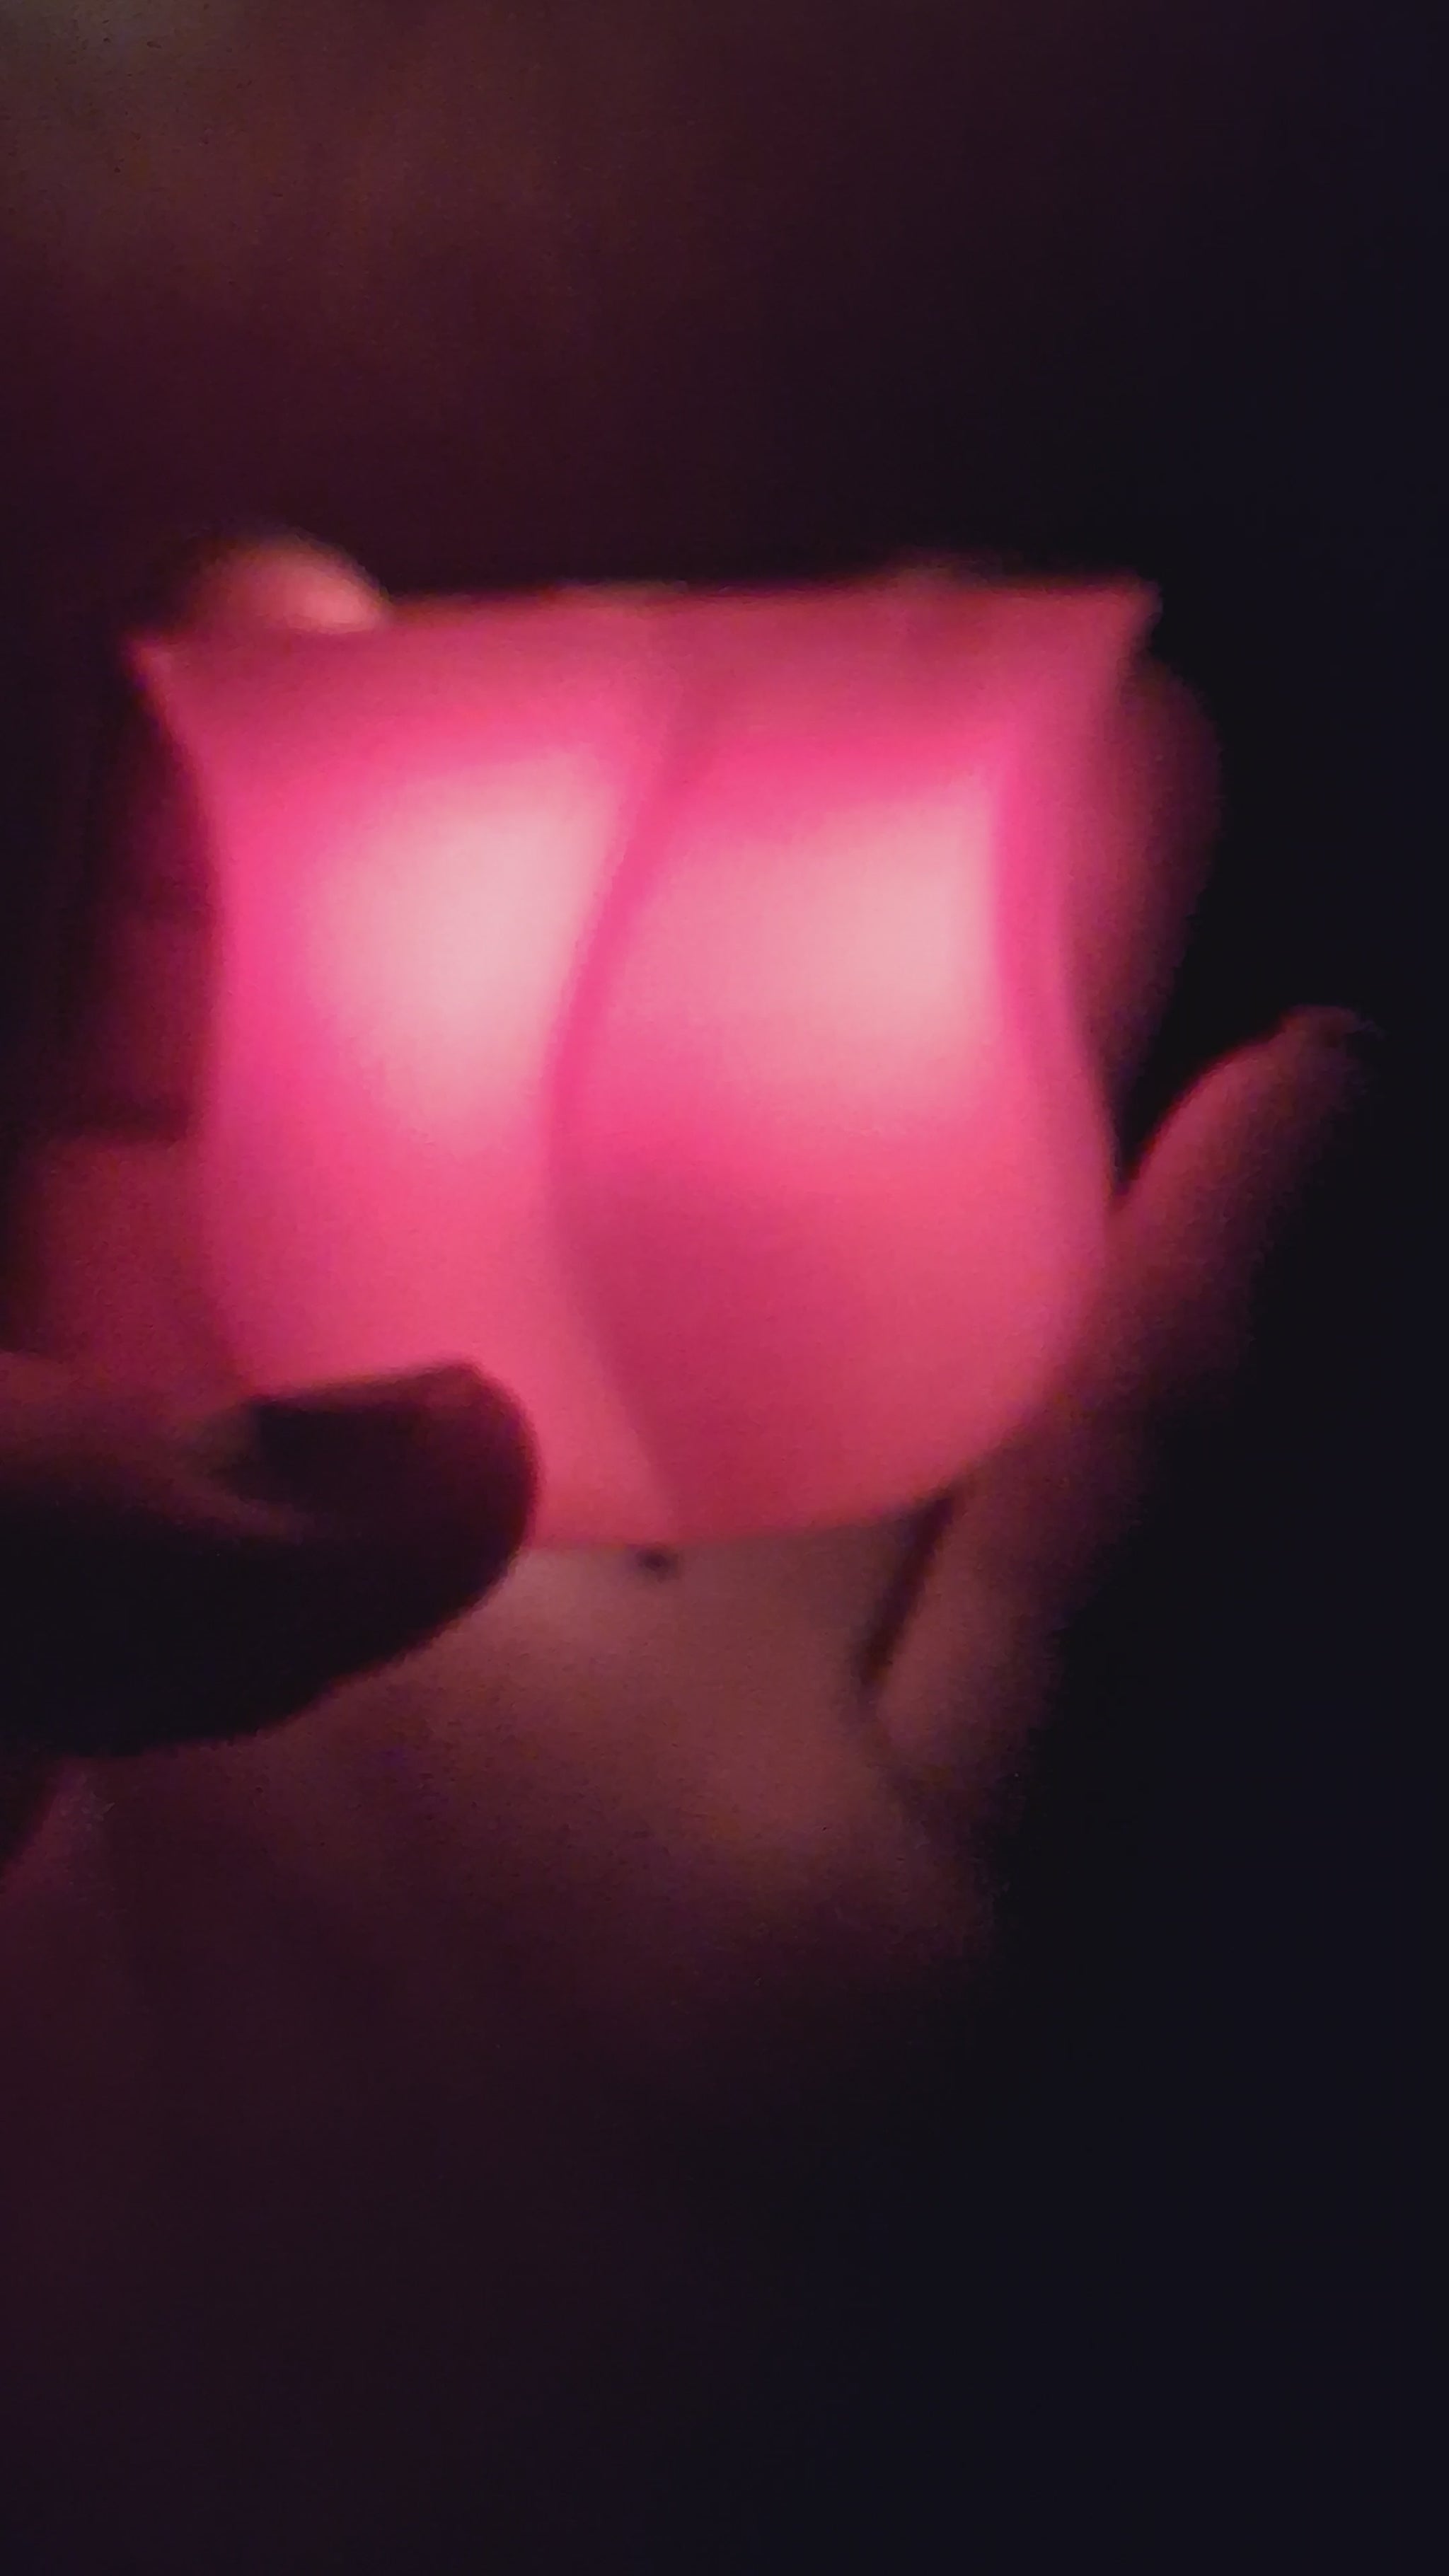 Video of a red 3D-printed rose with a flickering electronic tealight in the dark, highlighting the realistic flame effect, ending as the light is turned off and the scene fades to black.